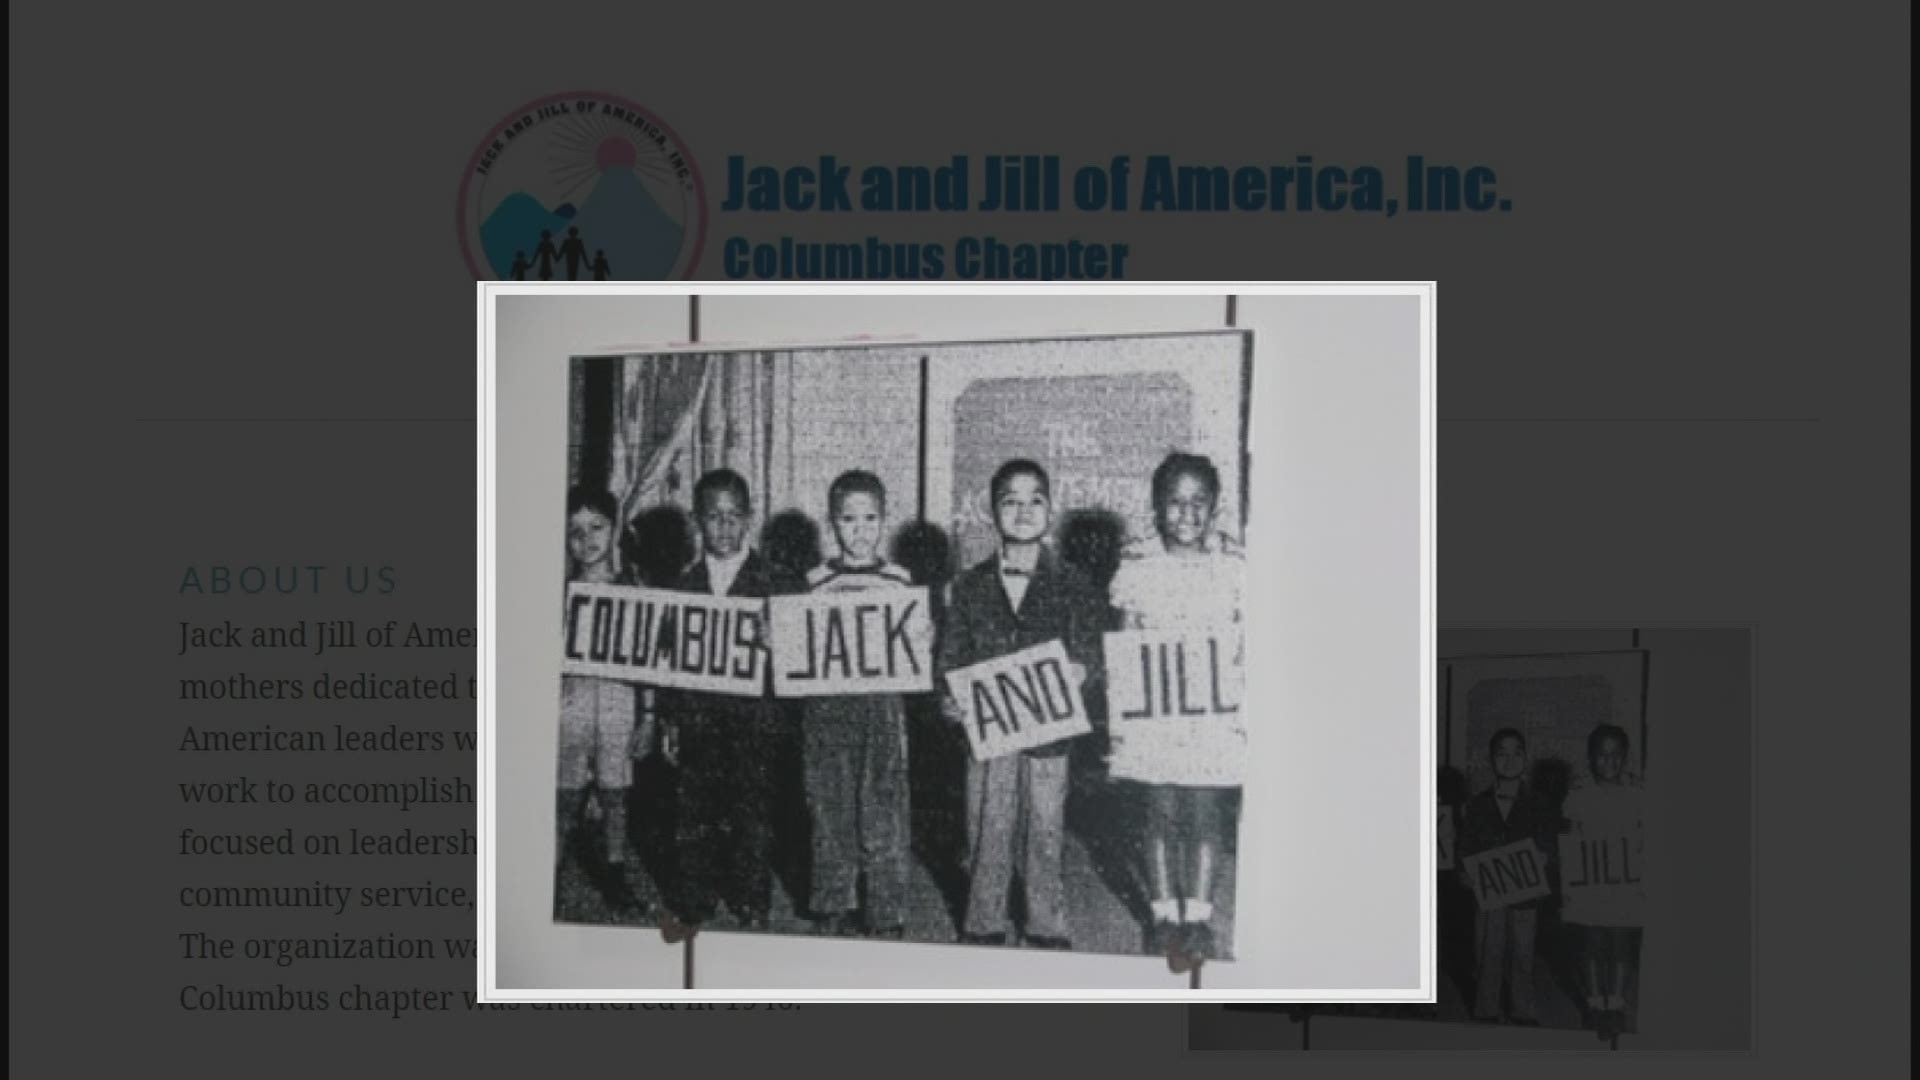 Jack and Jill of America, Incorporated is an African American organization of mothers representing over 40,000 family members nationwide.